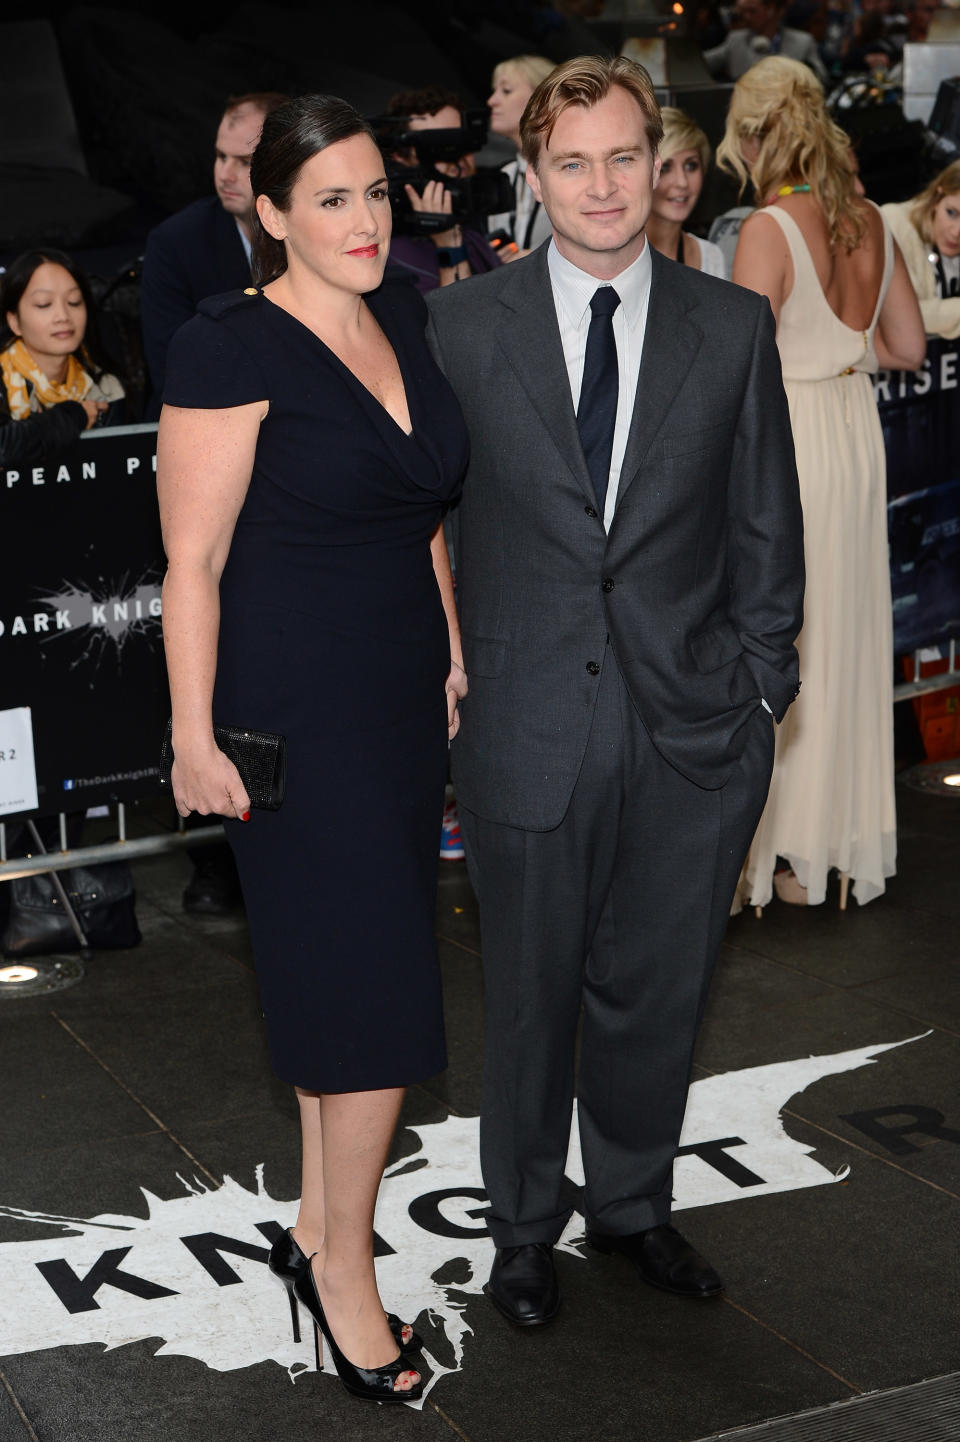 LONDON, ENGLAND - JULY 18: Director Christopher Nolan and producer Emma Thomas attend the European premiere of "The Dark Knight Rises" at Odeon Leicester Square on July 18, 2012 in London, England. (Photo by Ian Gavan/Getty Images)